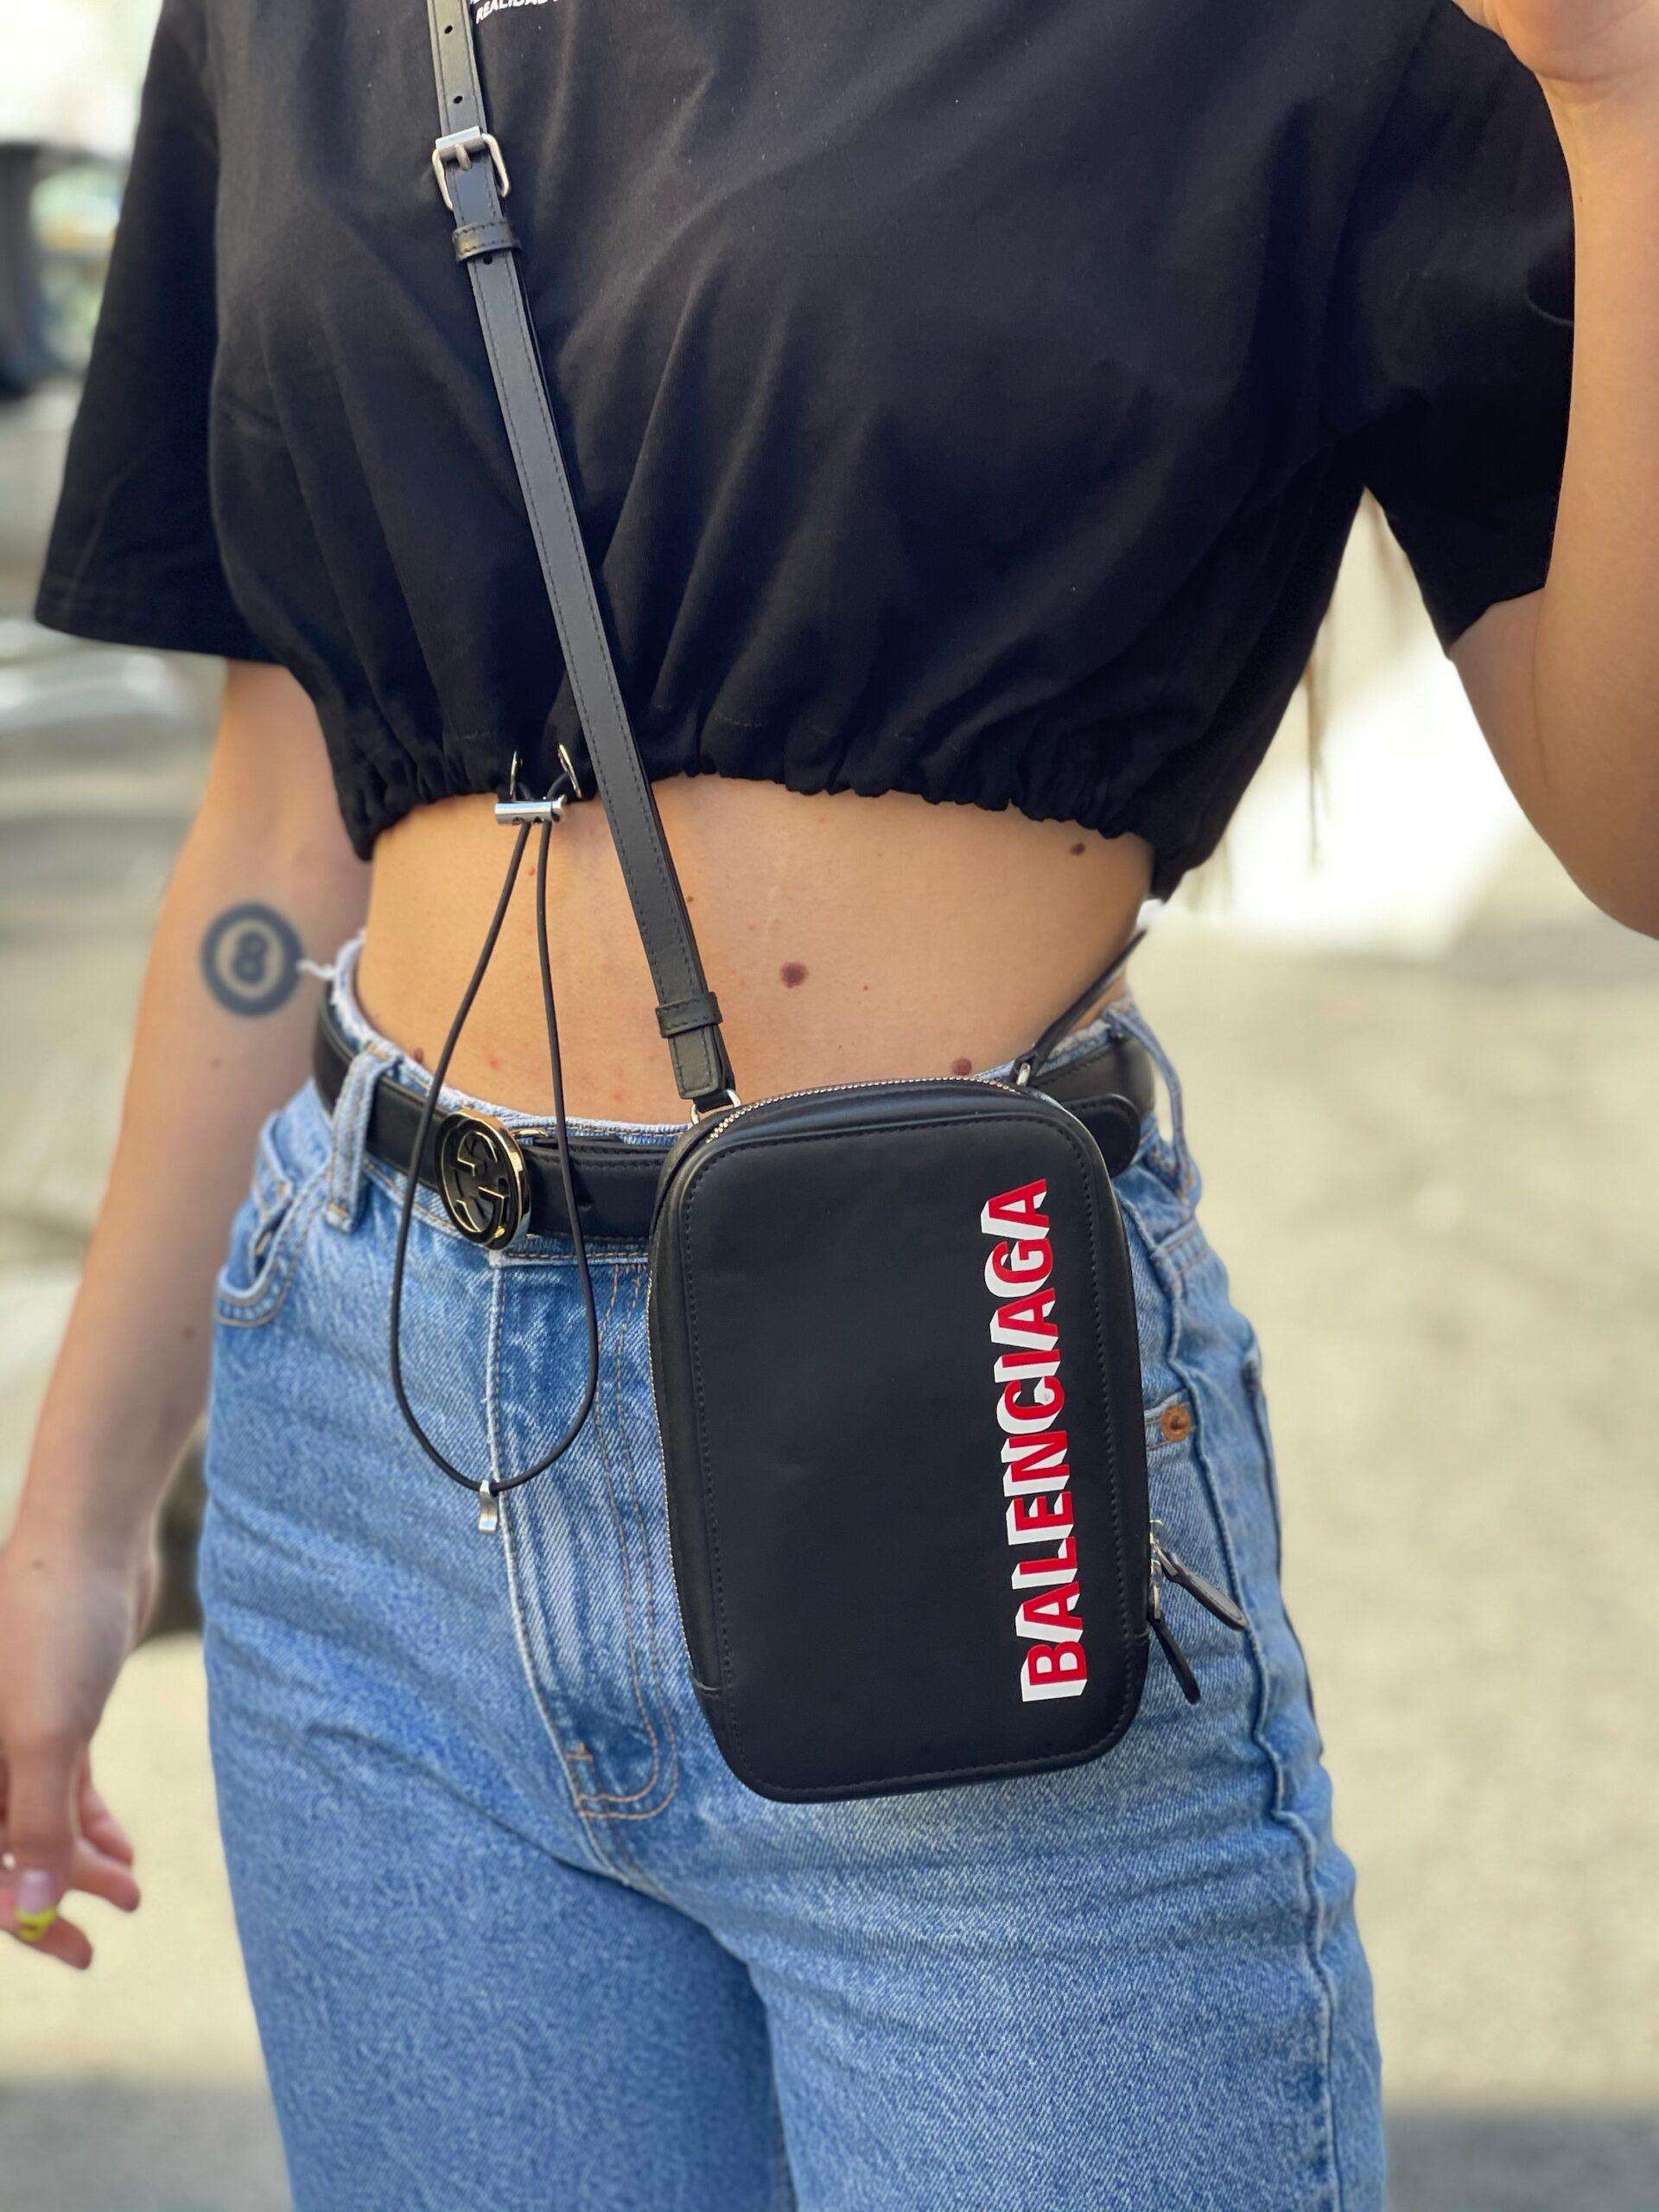 Mini shoulder bag by Balenciaga, made of black leather with red printed writing and silver hardware.
Equipped with a zip closure, internally lined in black leather, suitable for the essentials.
Equipped with a thin removable and adjustable shoulder